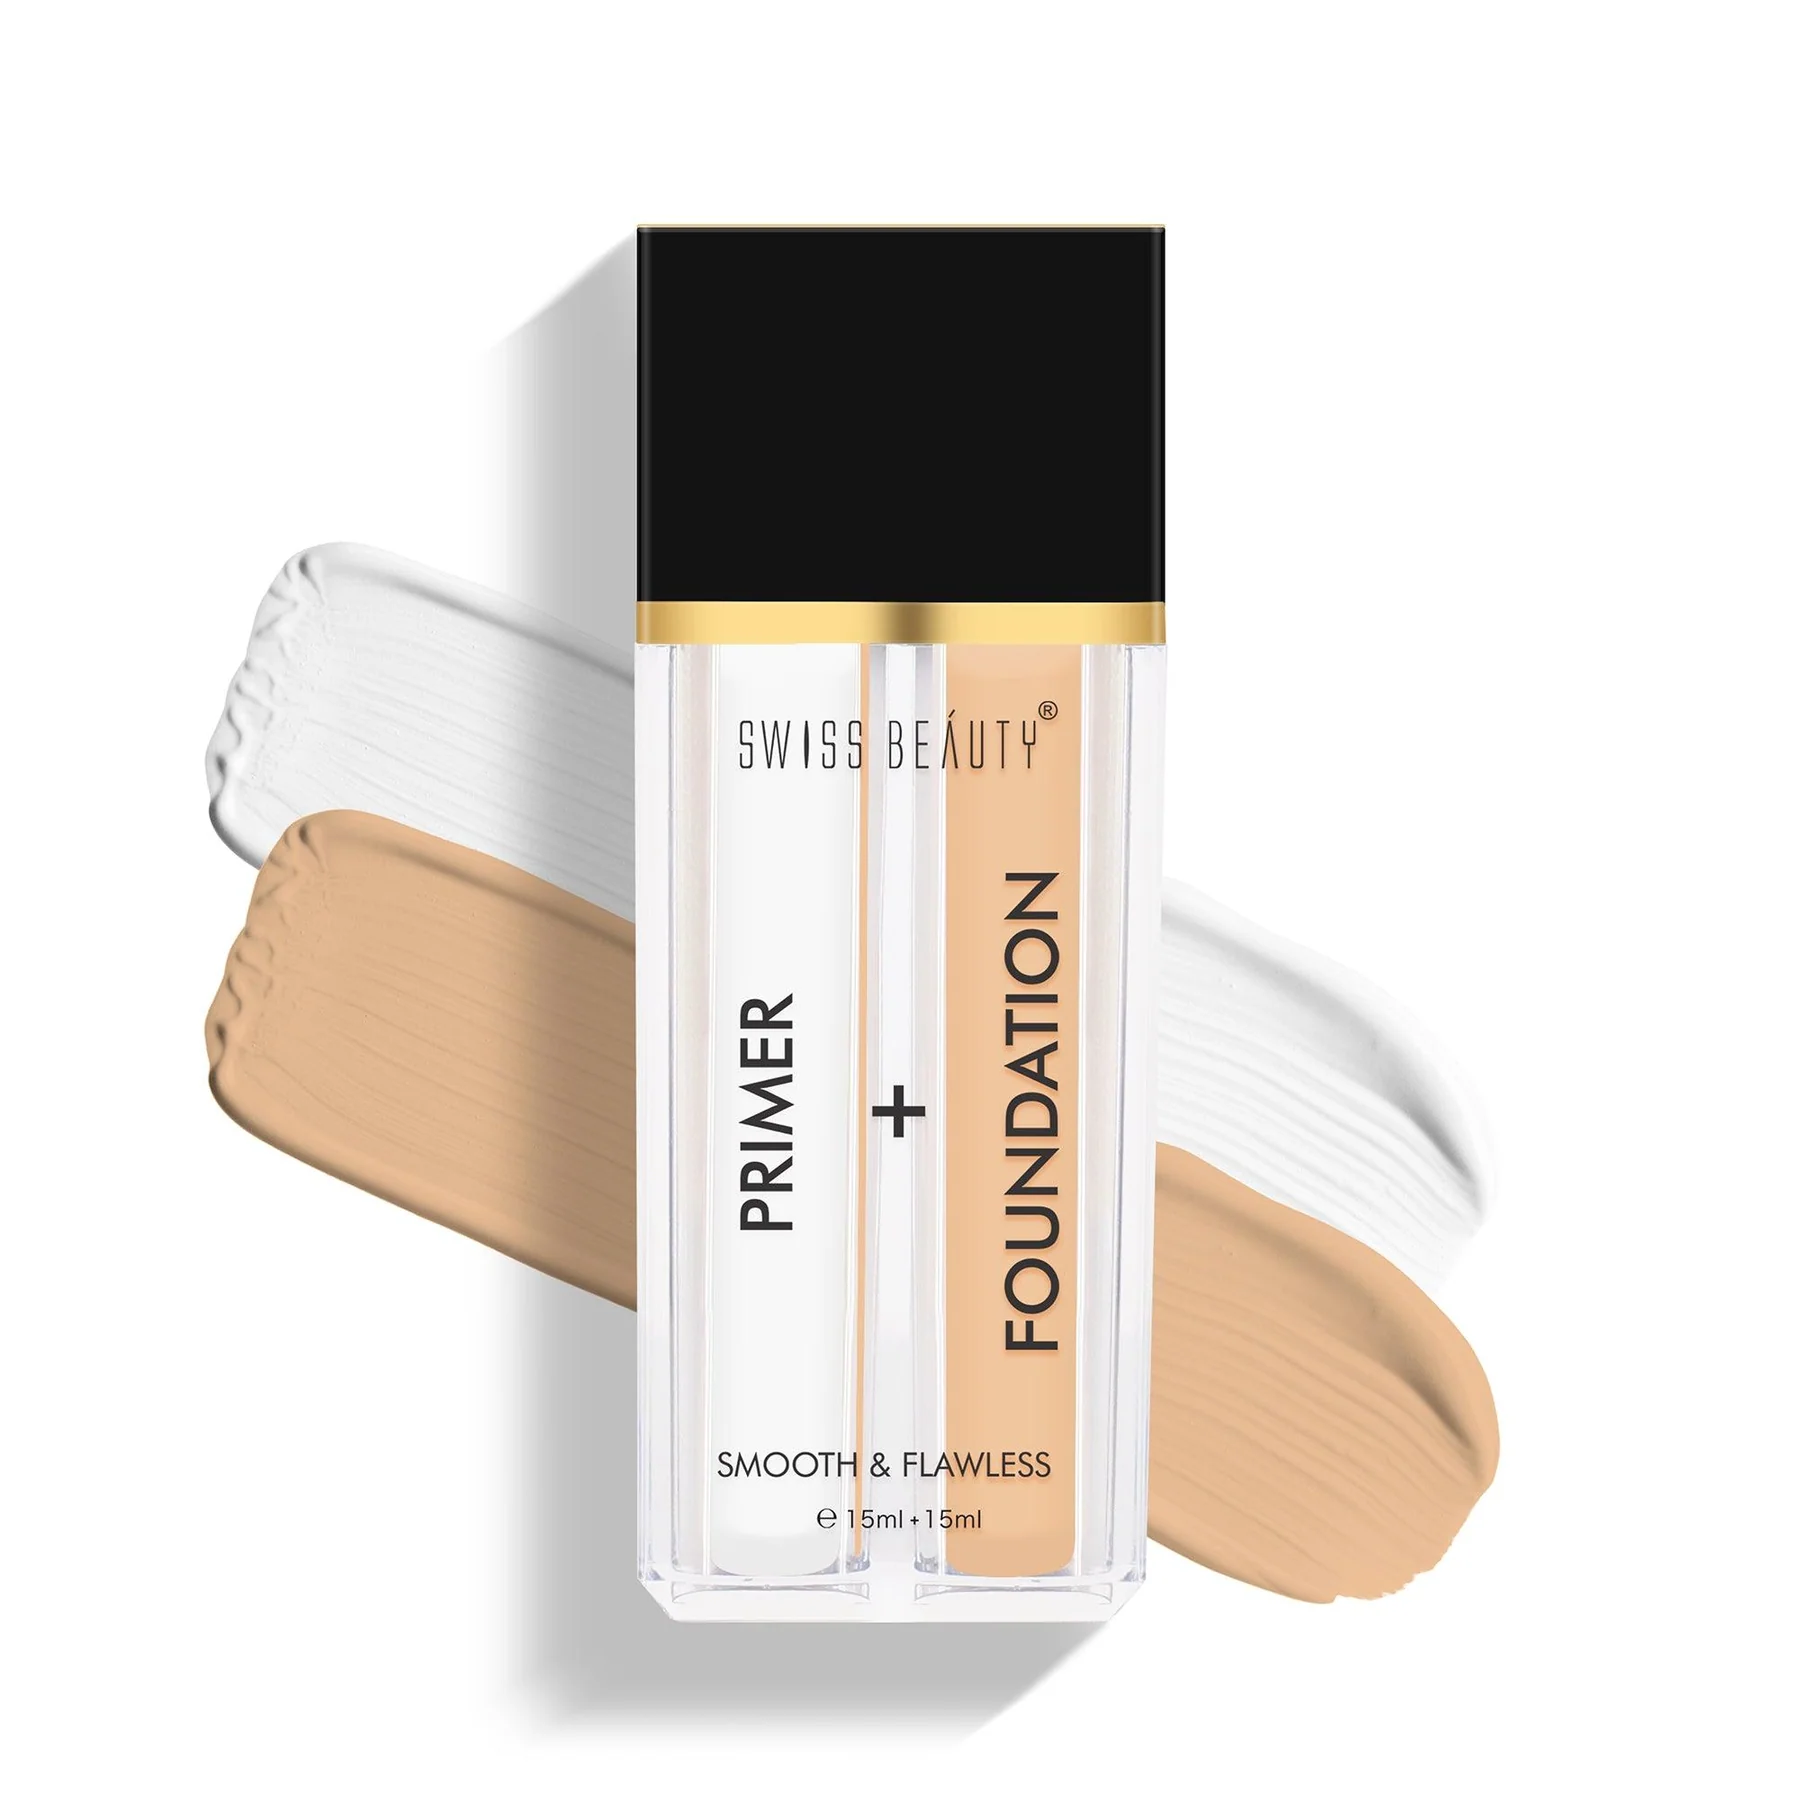 Swiss beauty primer and foundation